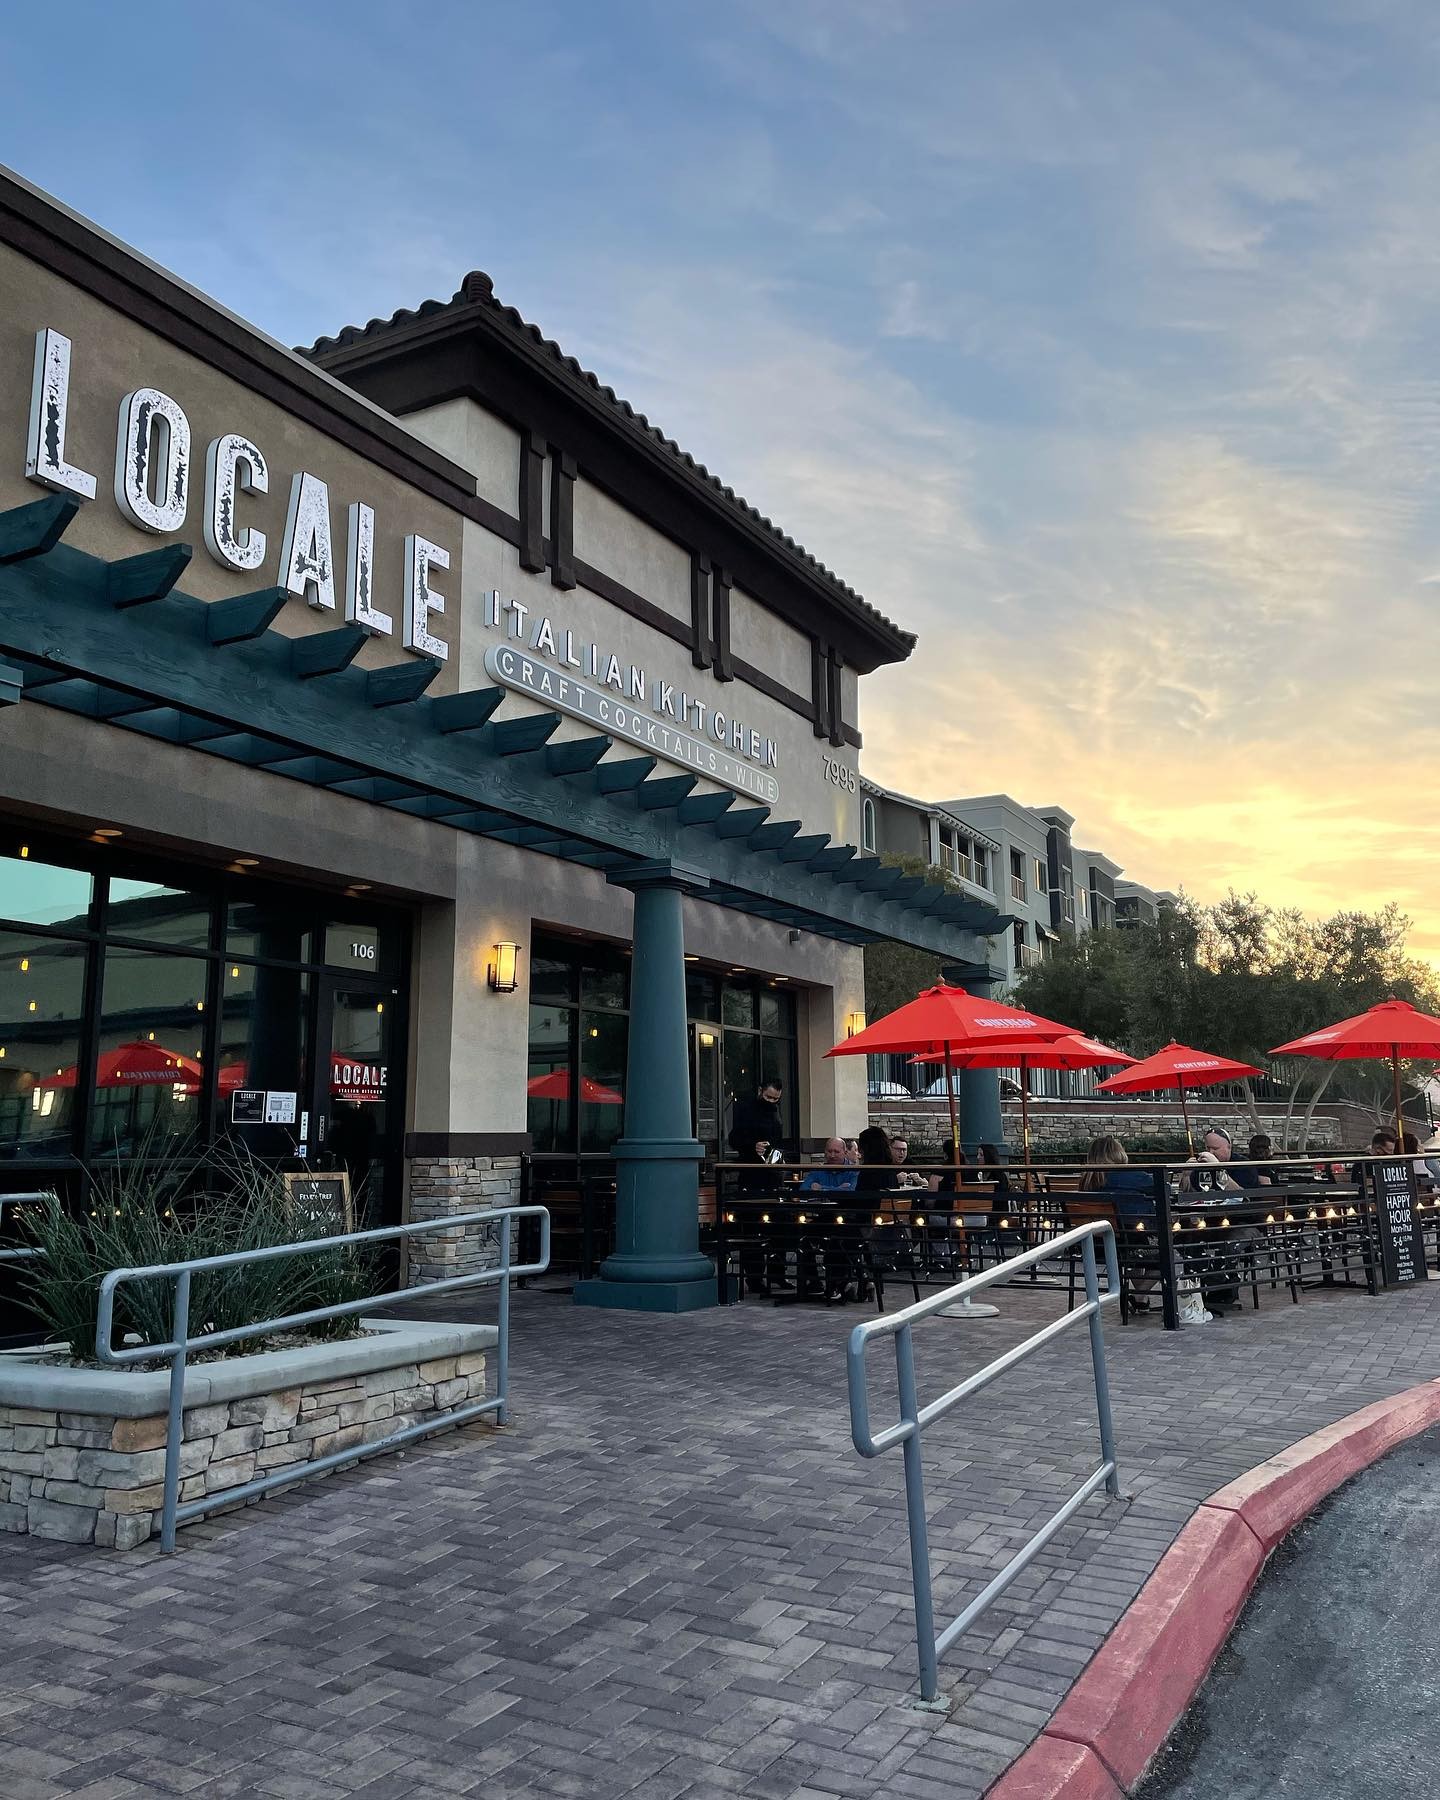 Locale Italian Kitchen + Craft Cocktails brings a taste of Tuscany to the southwest